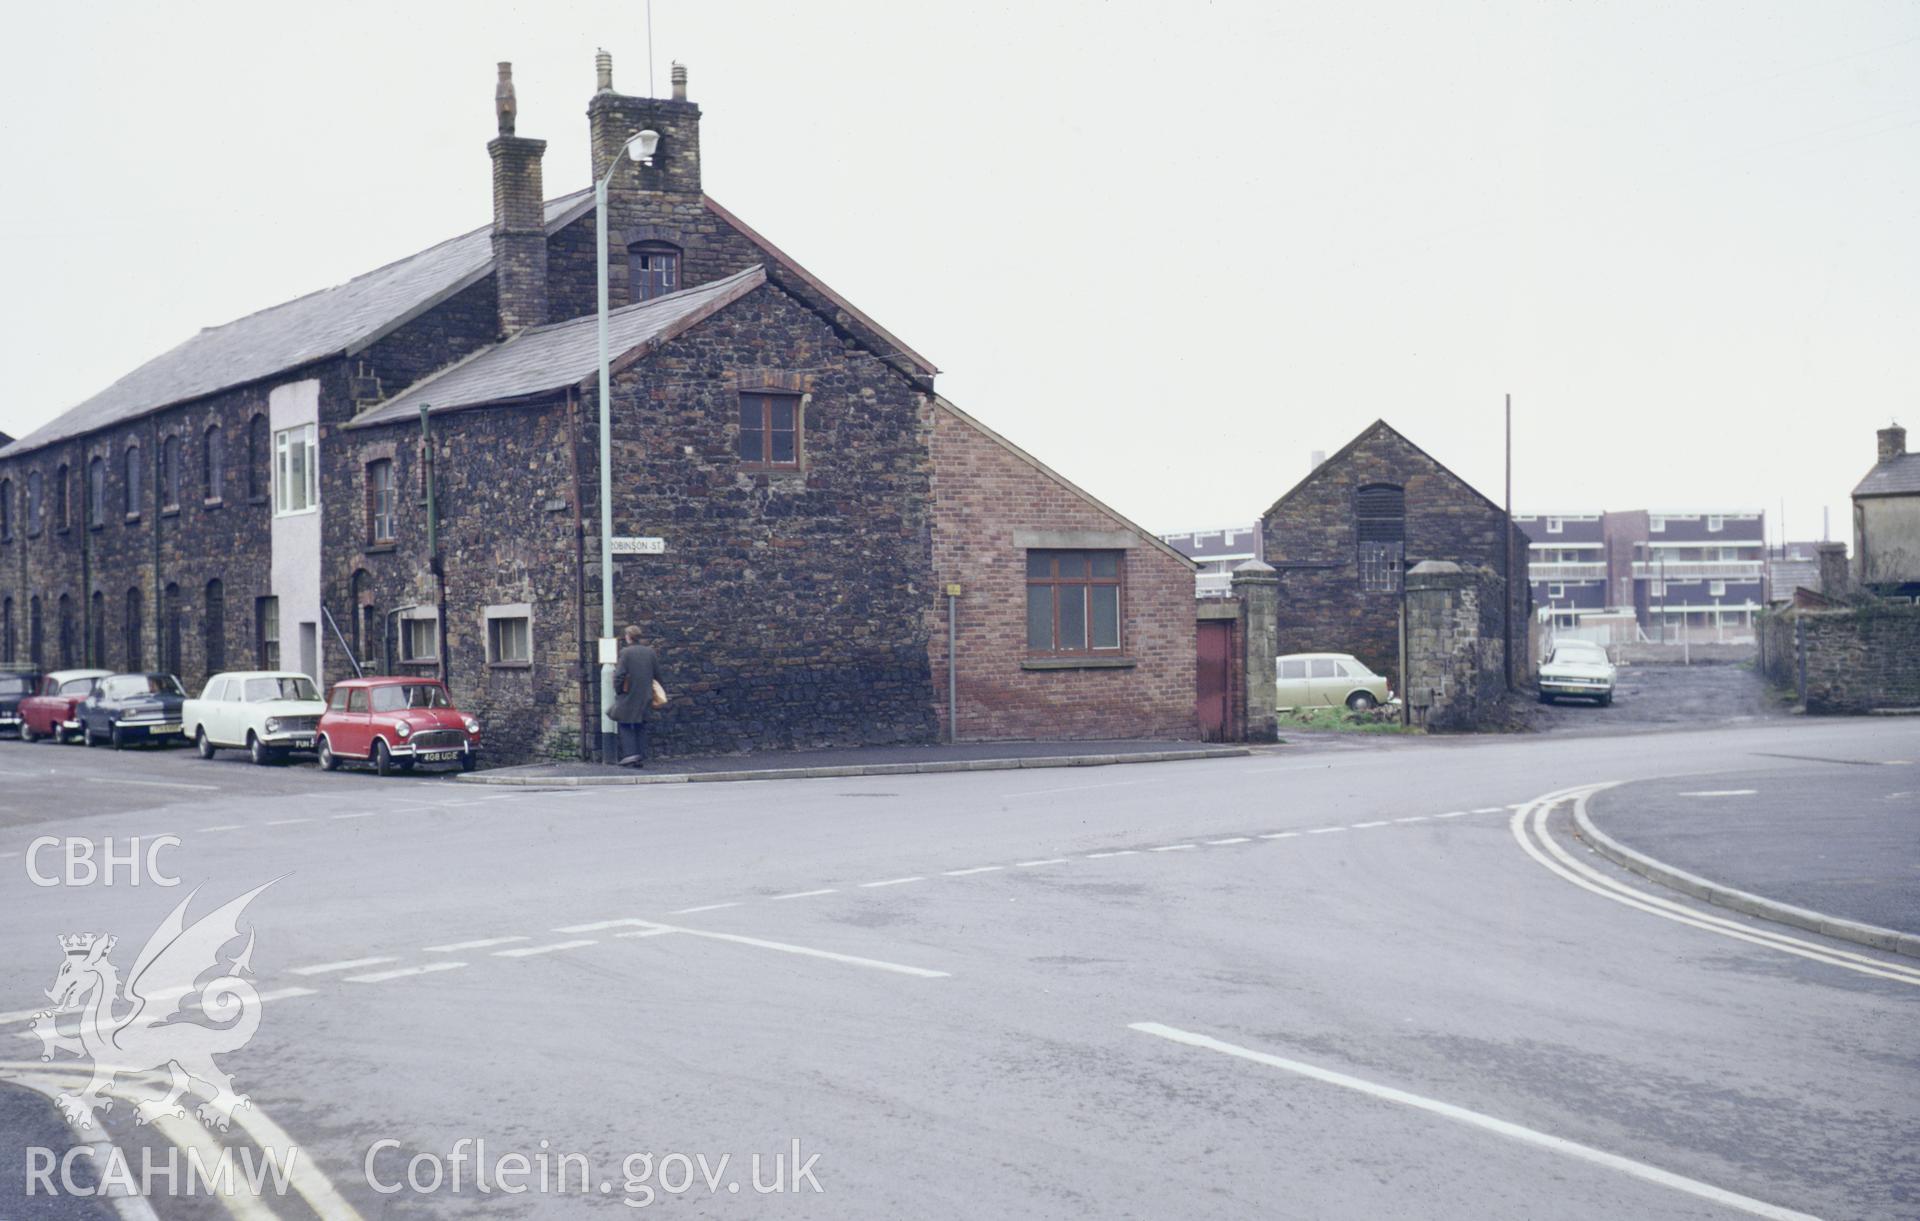 35mm colour slide showing Llanmore Works, Llanelli, Carmarthenshire, by Dylan Roberts.